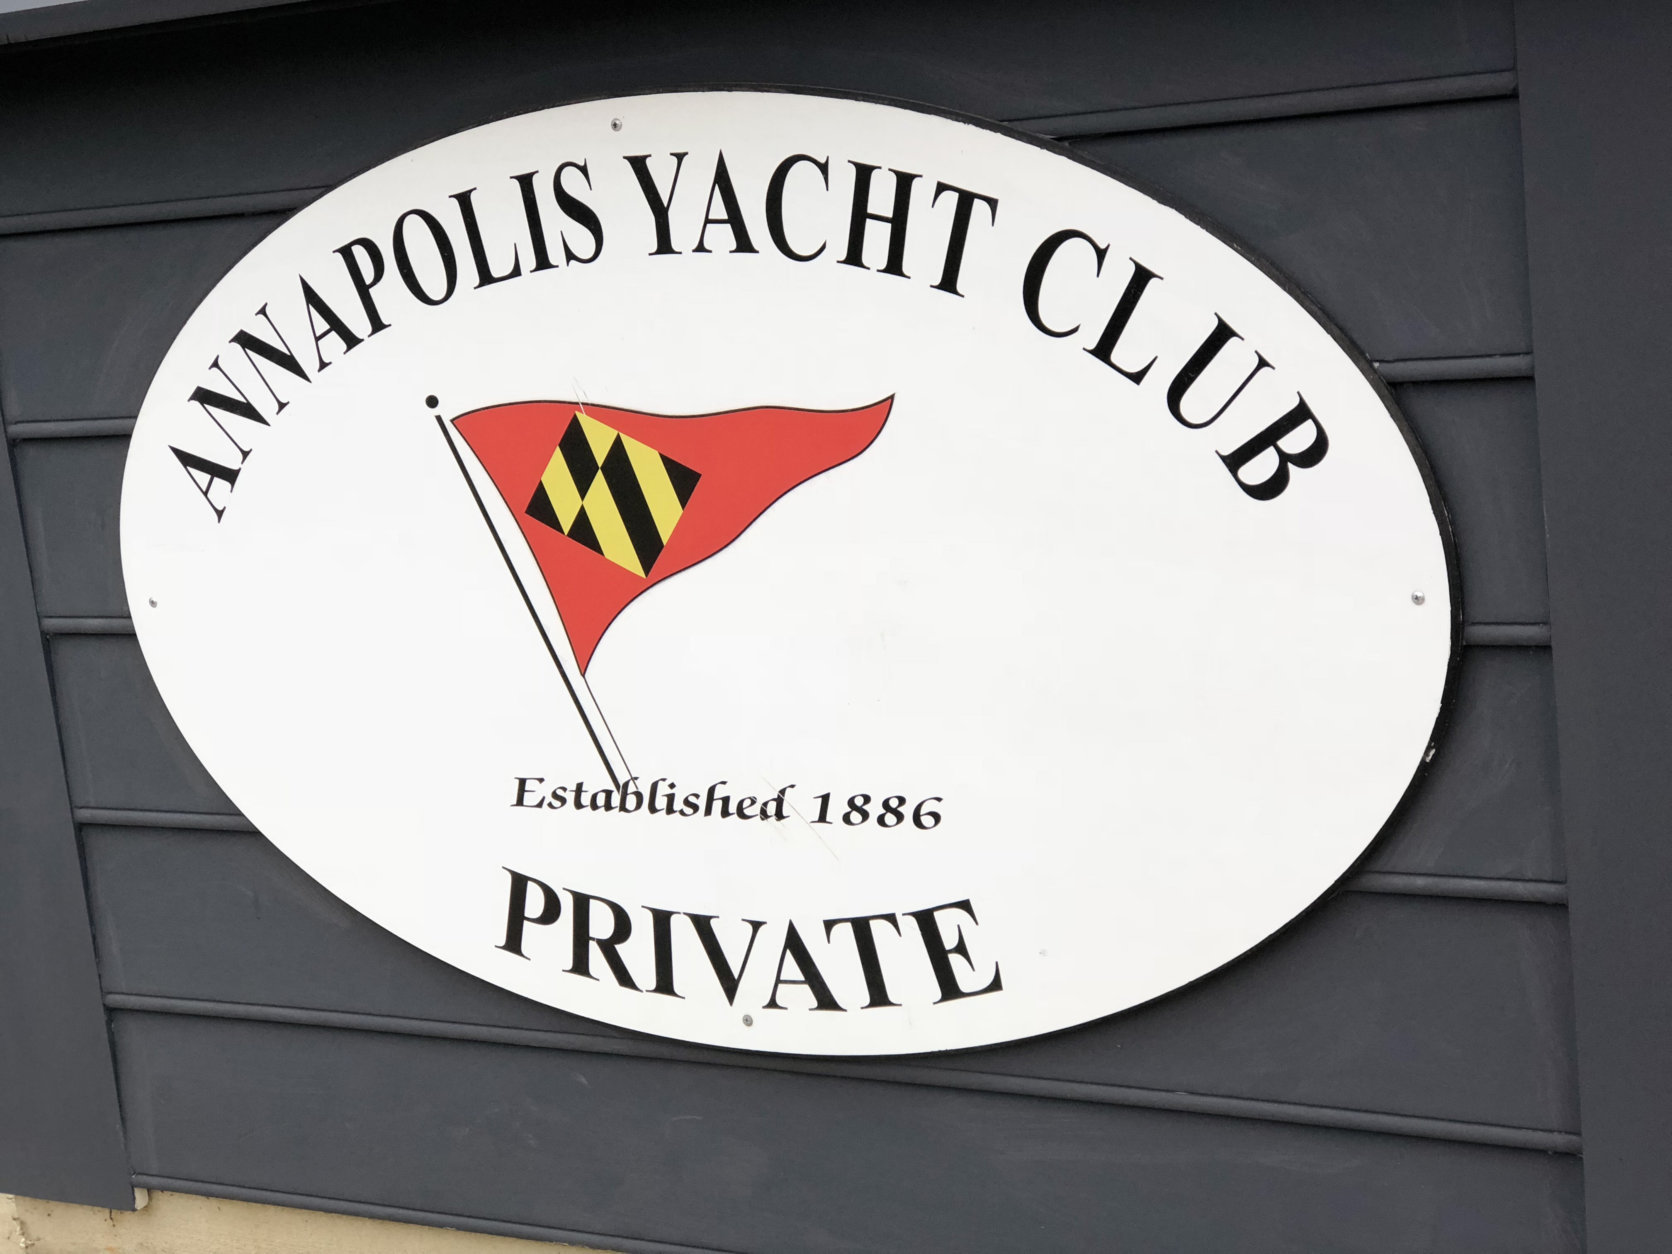 The Annapolis Yacht Club has reopened nearly three years after a fire. (WTOP/Kate Ryan)